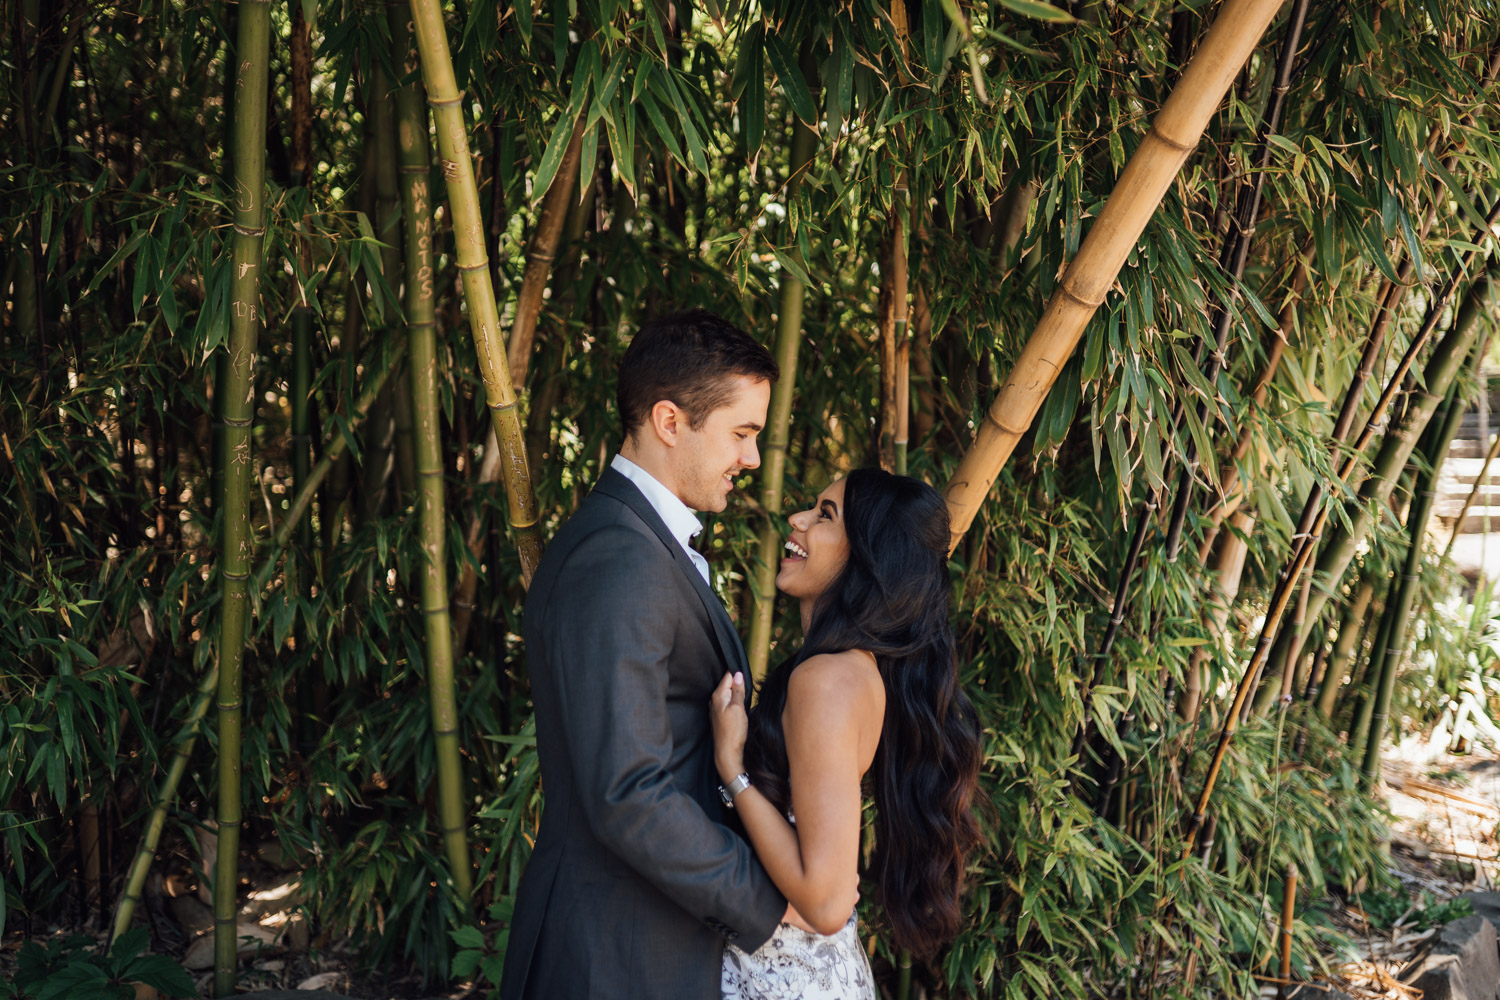 queen elizabeth park engagement session in summer photography